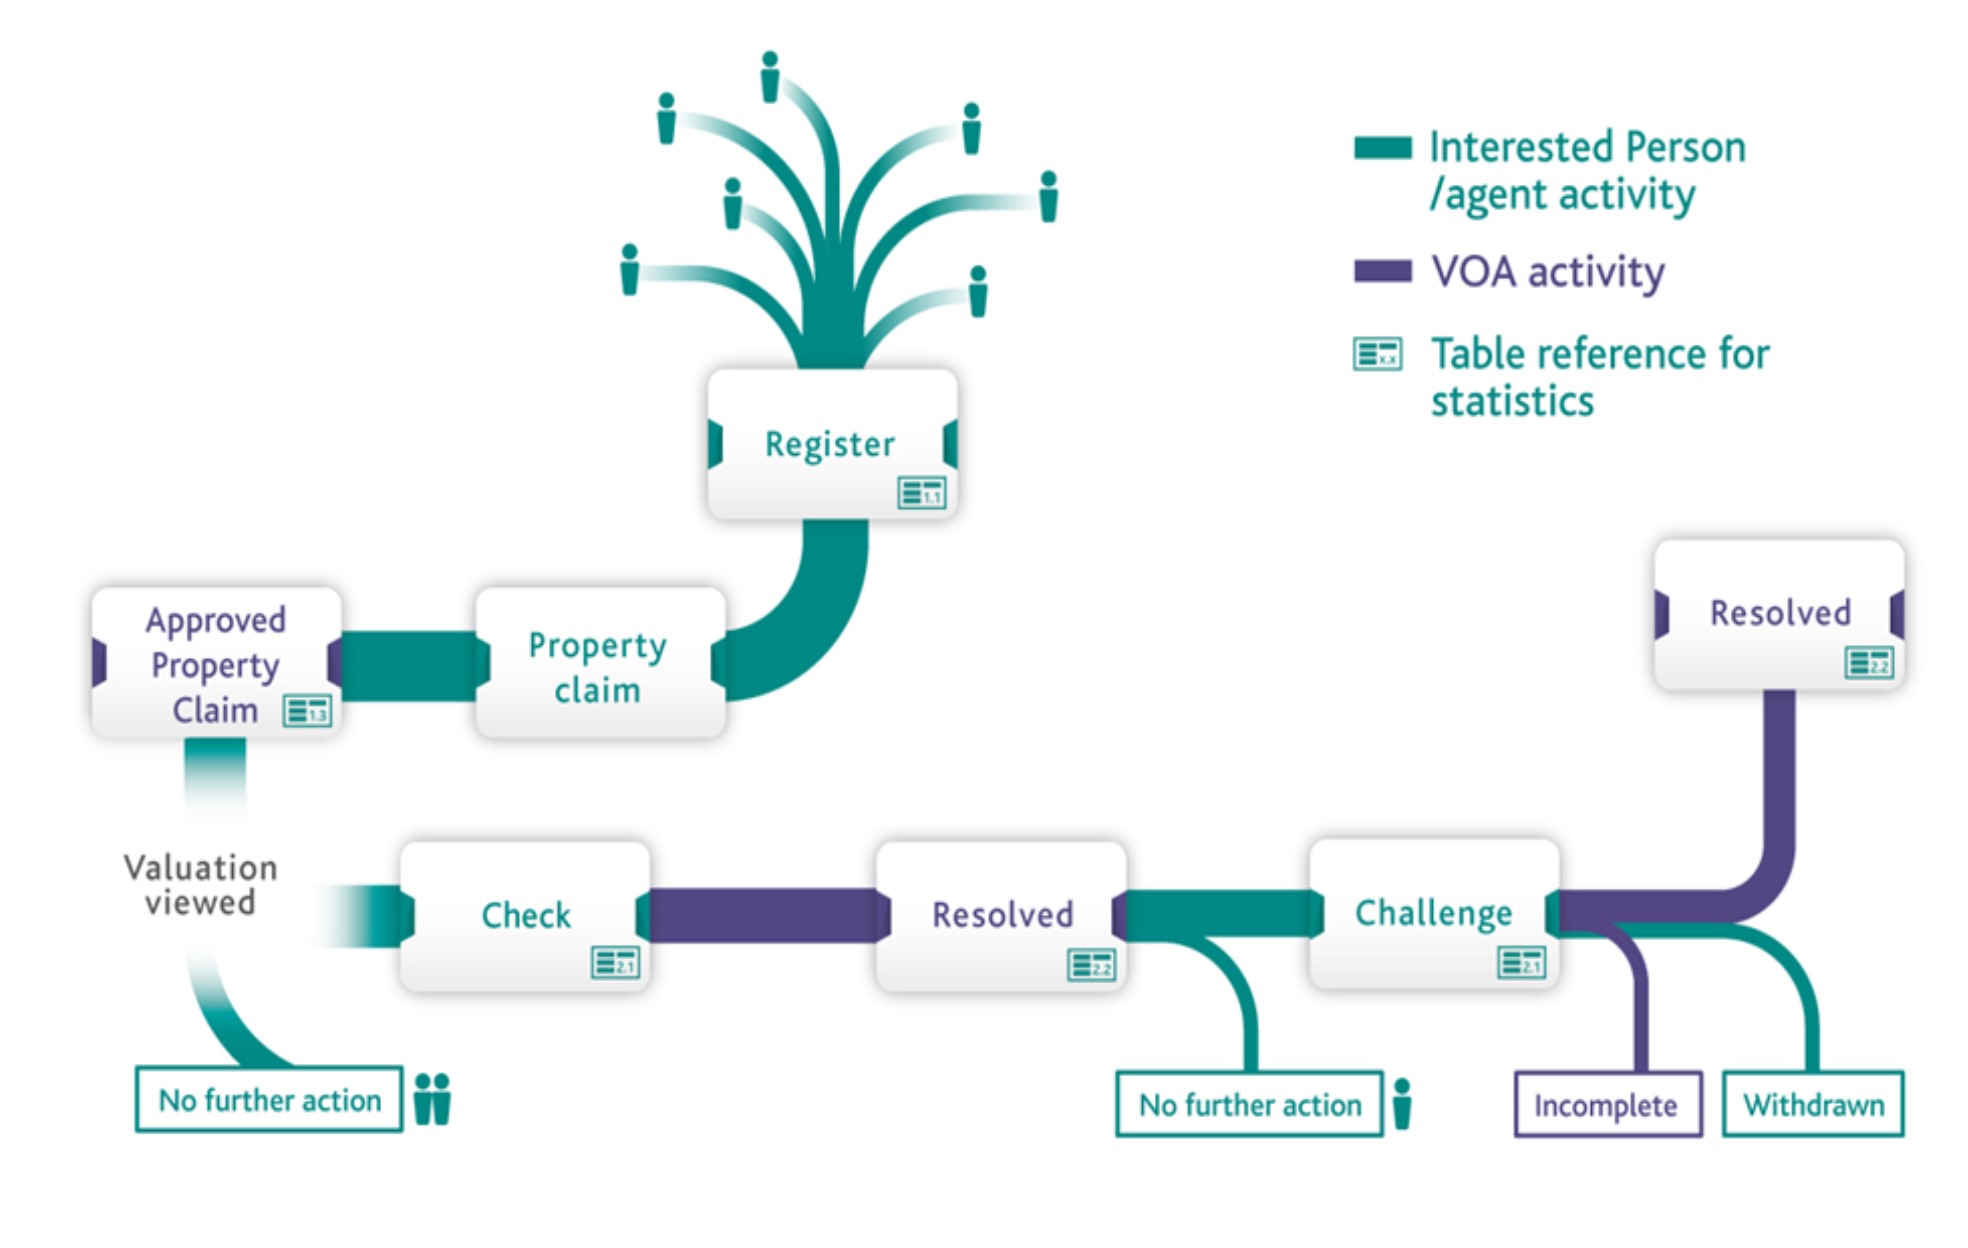 Figure 1 provides an overview of the CCA process.